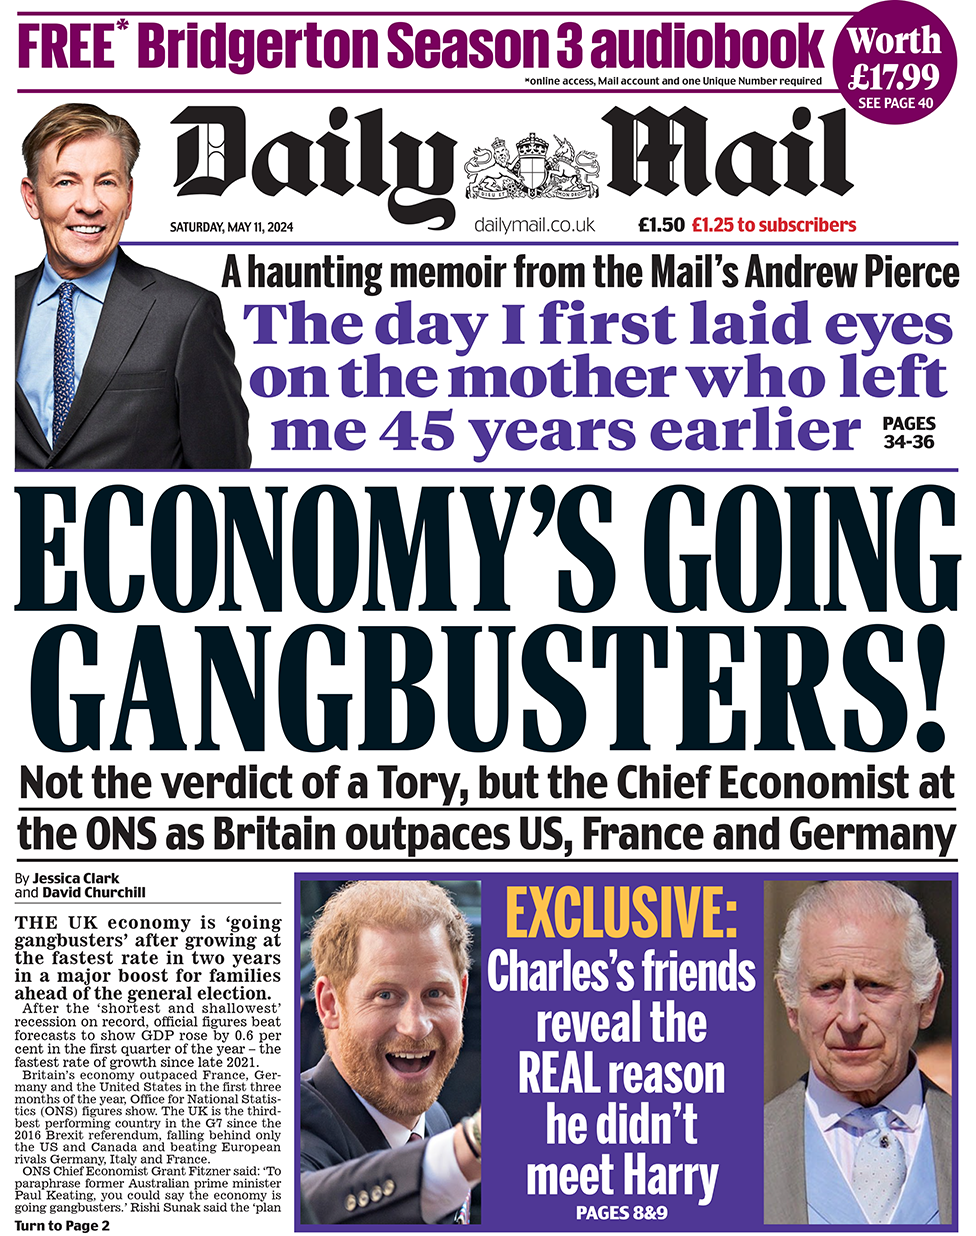 Daily Mail front page